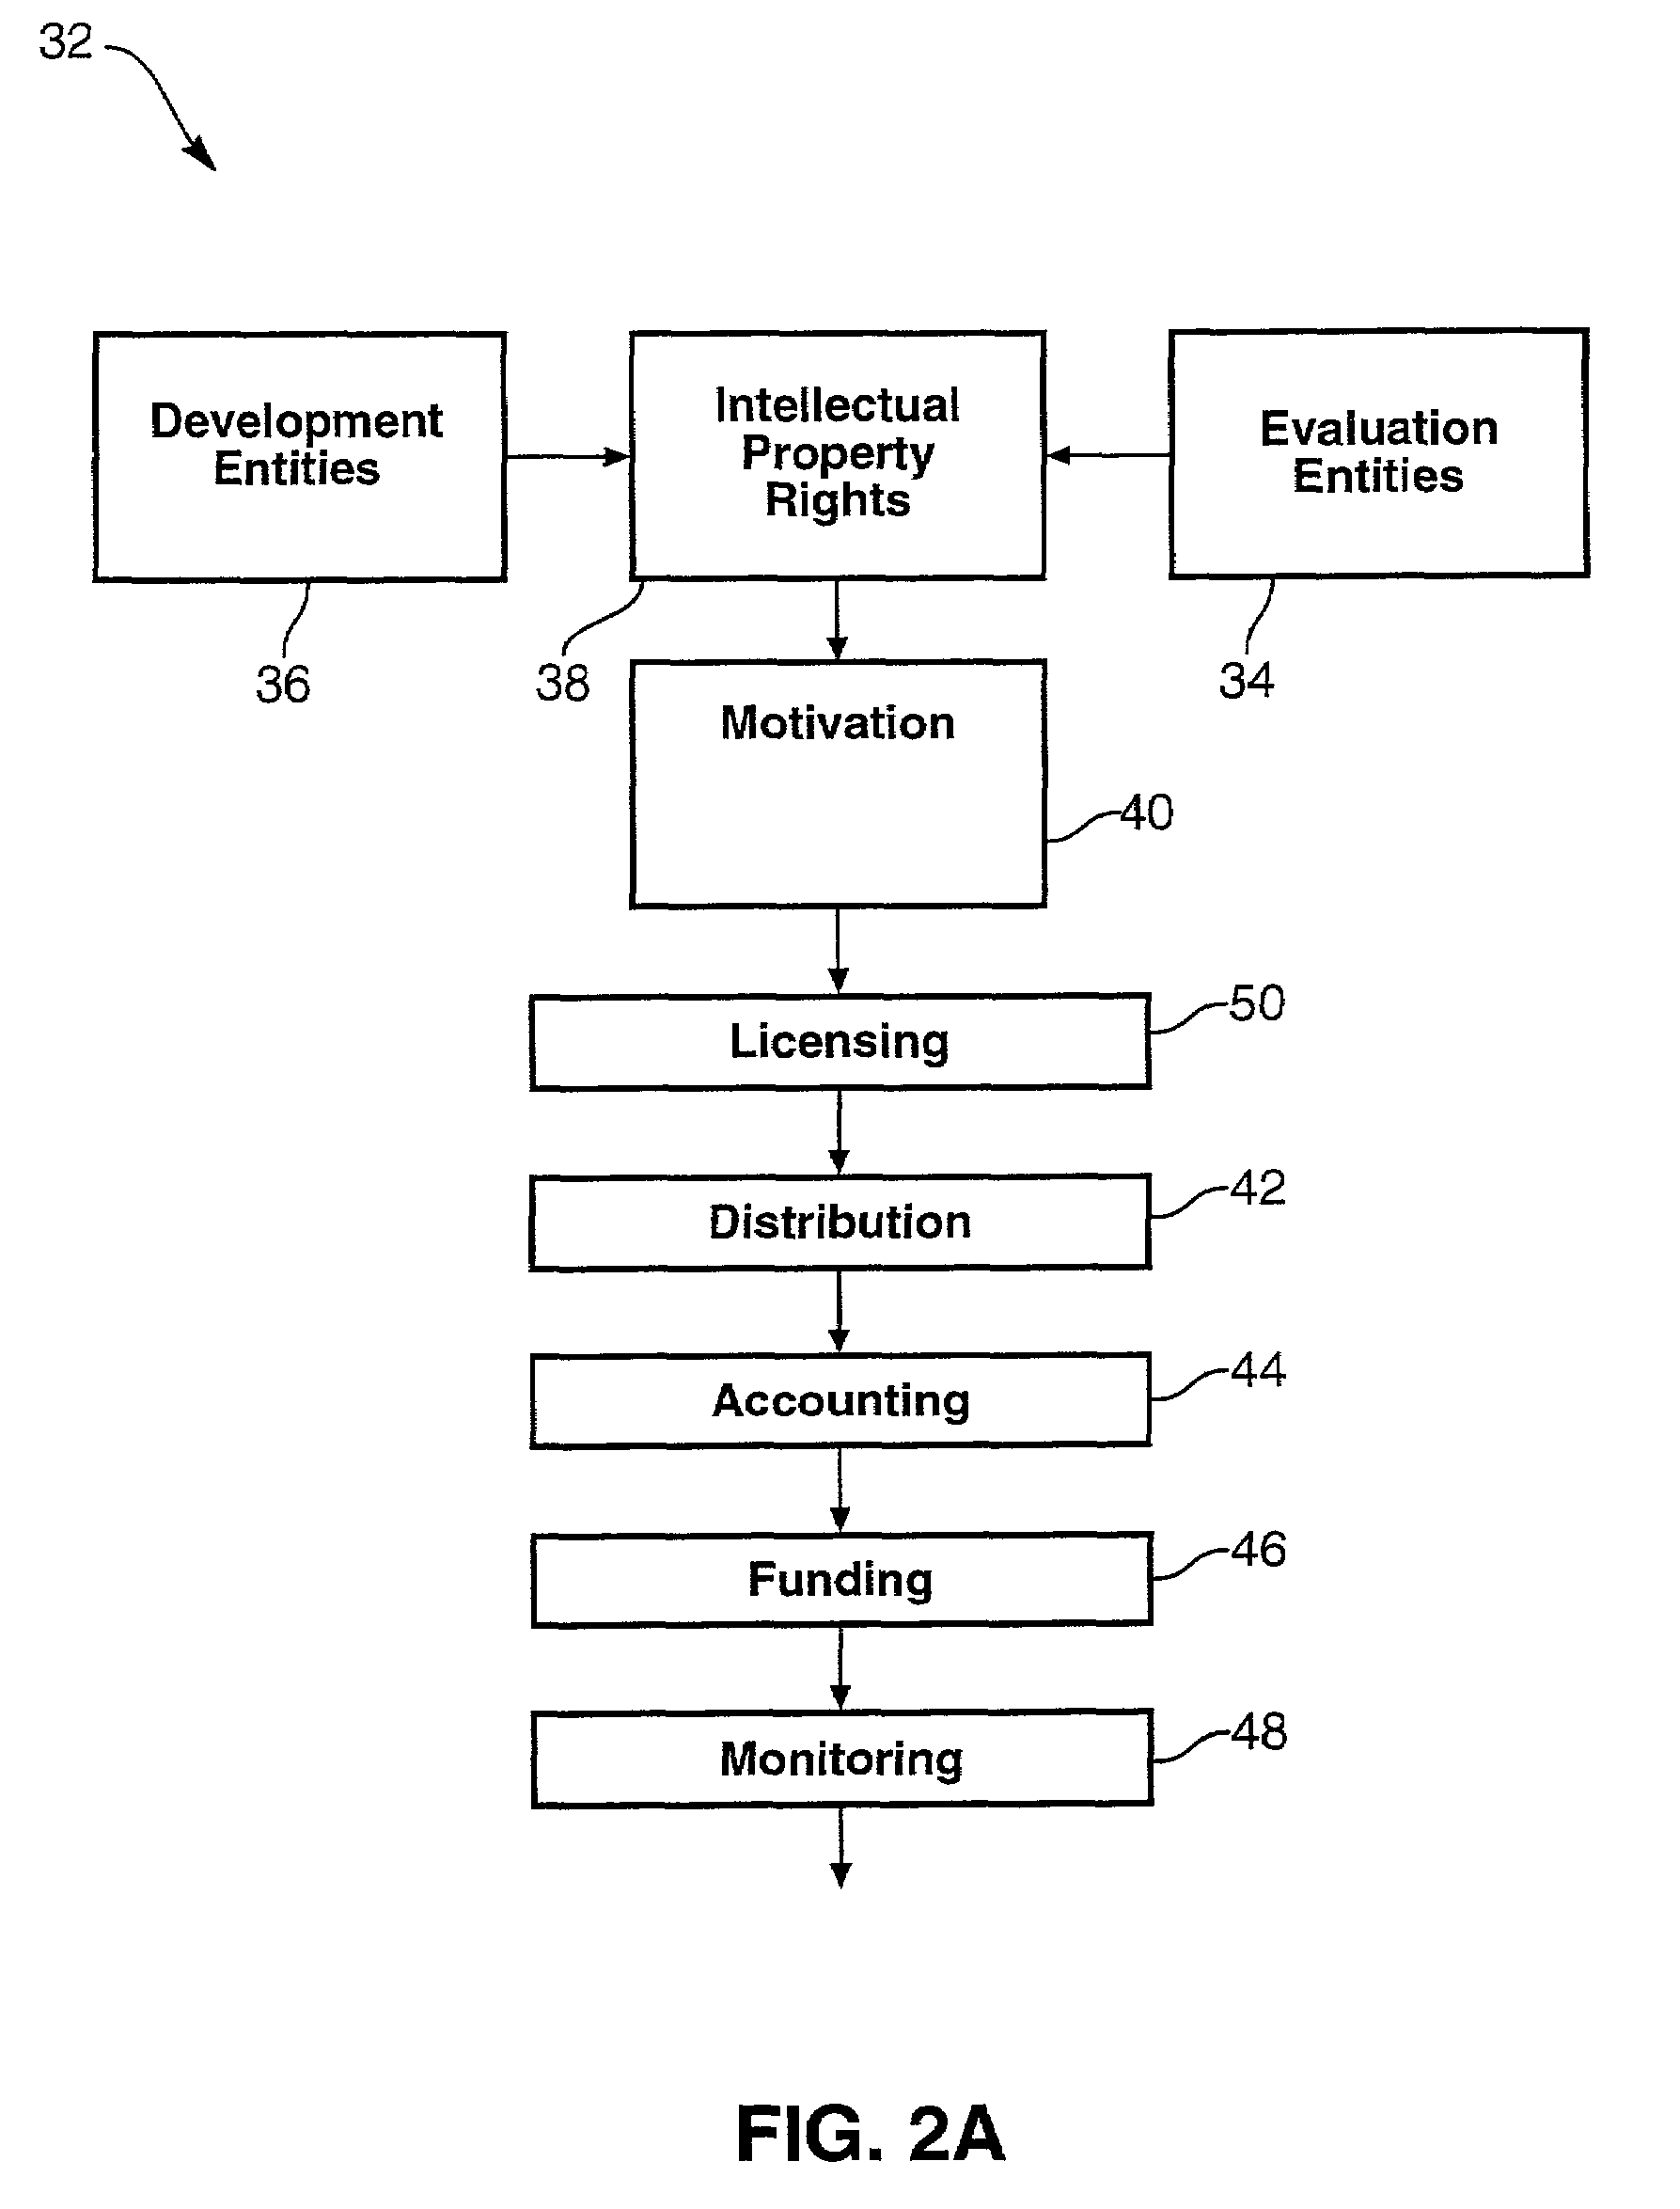 Computerized product improvement apparatus and method